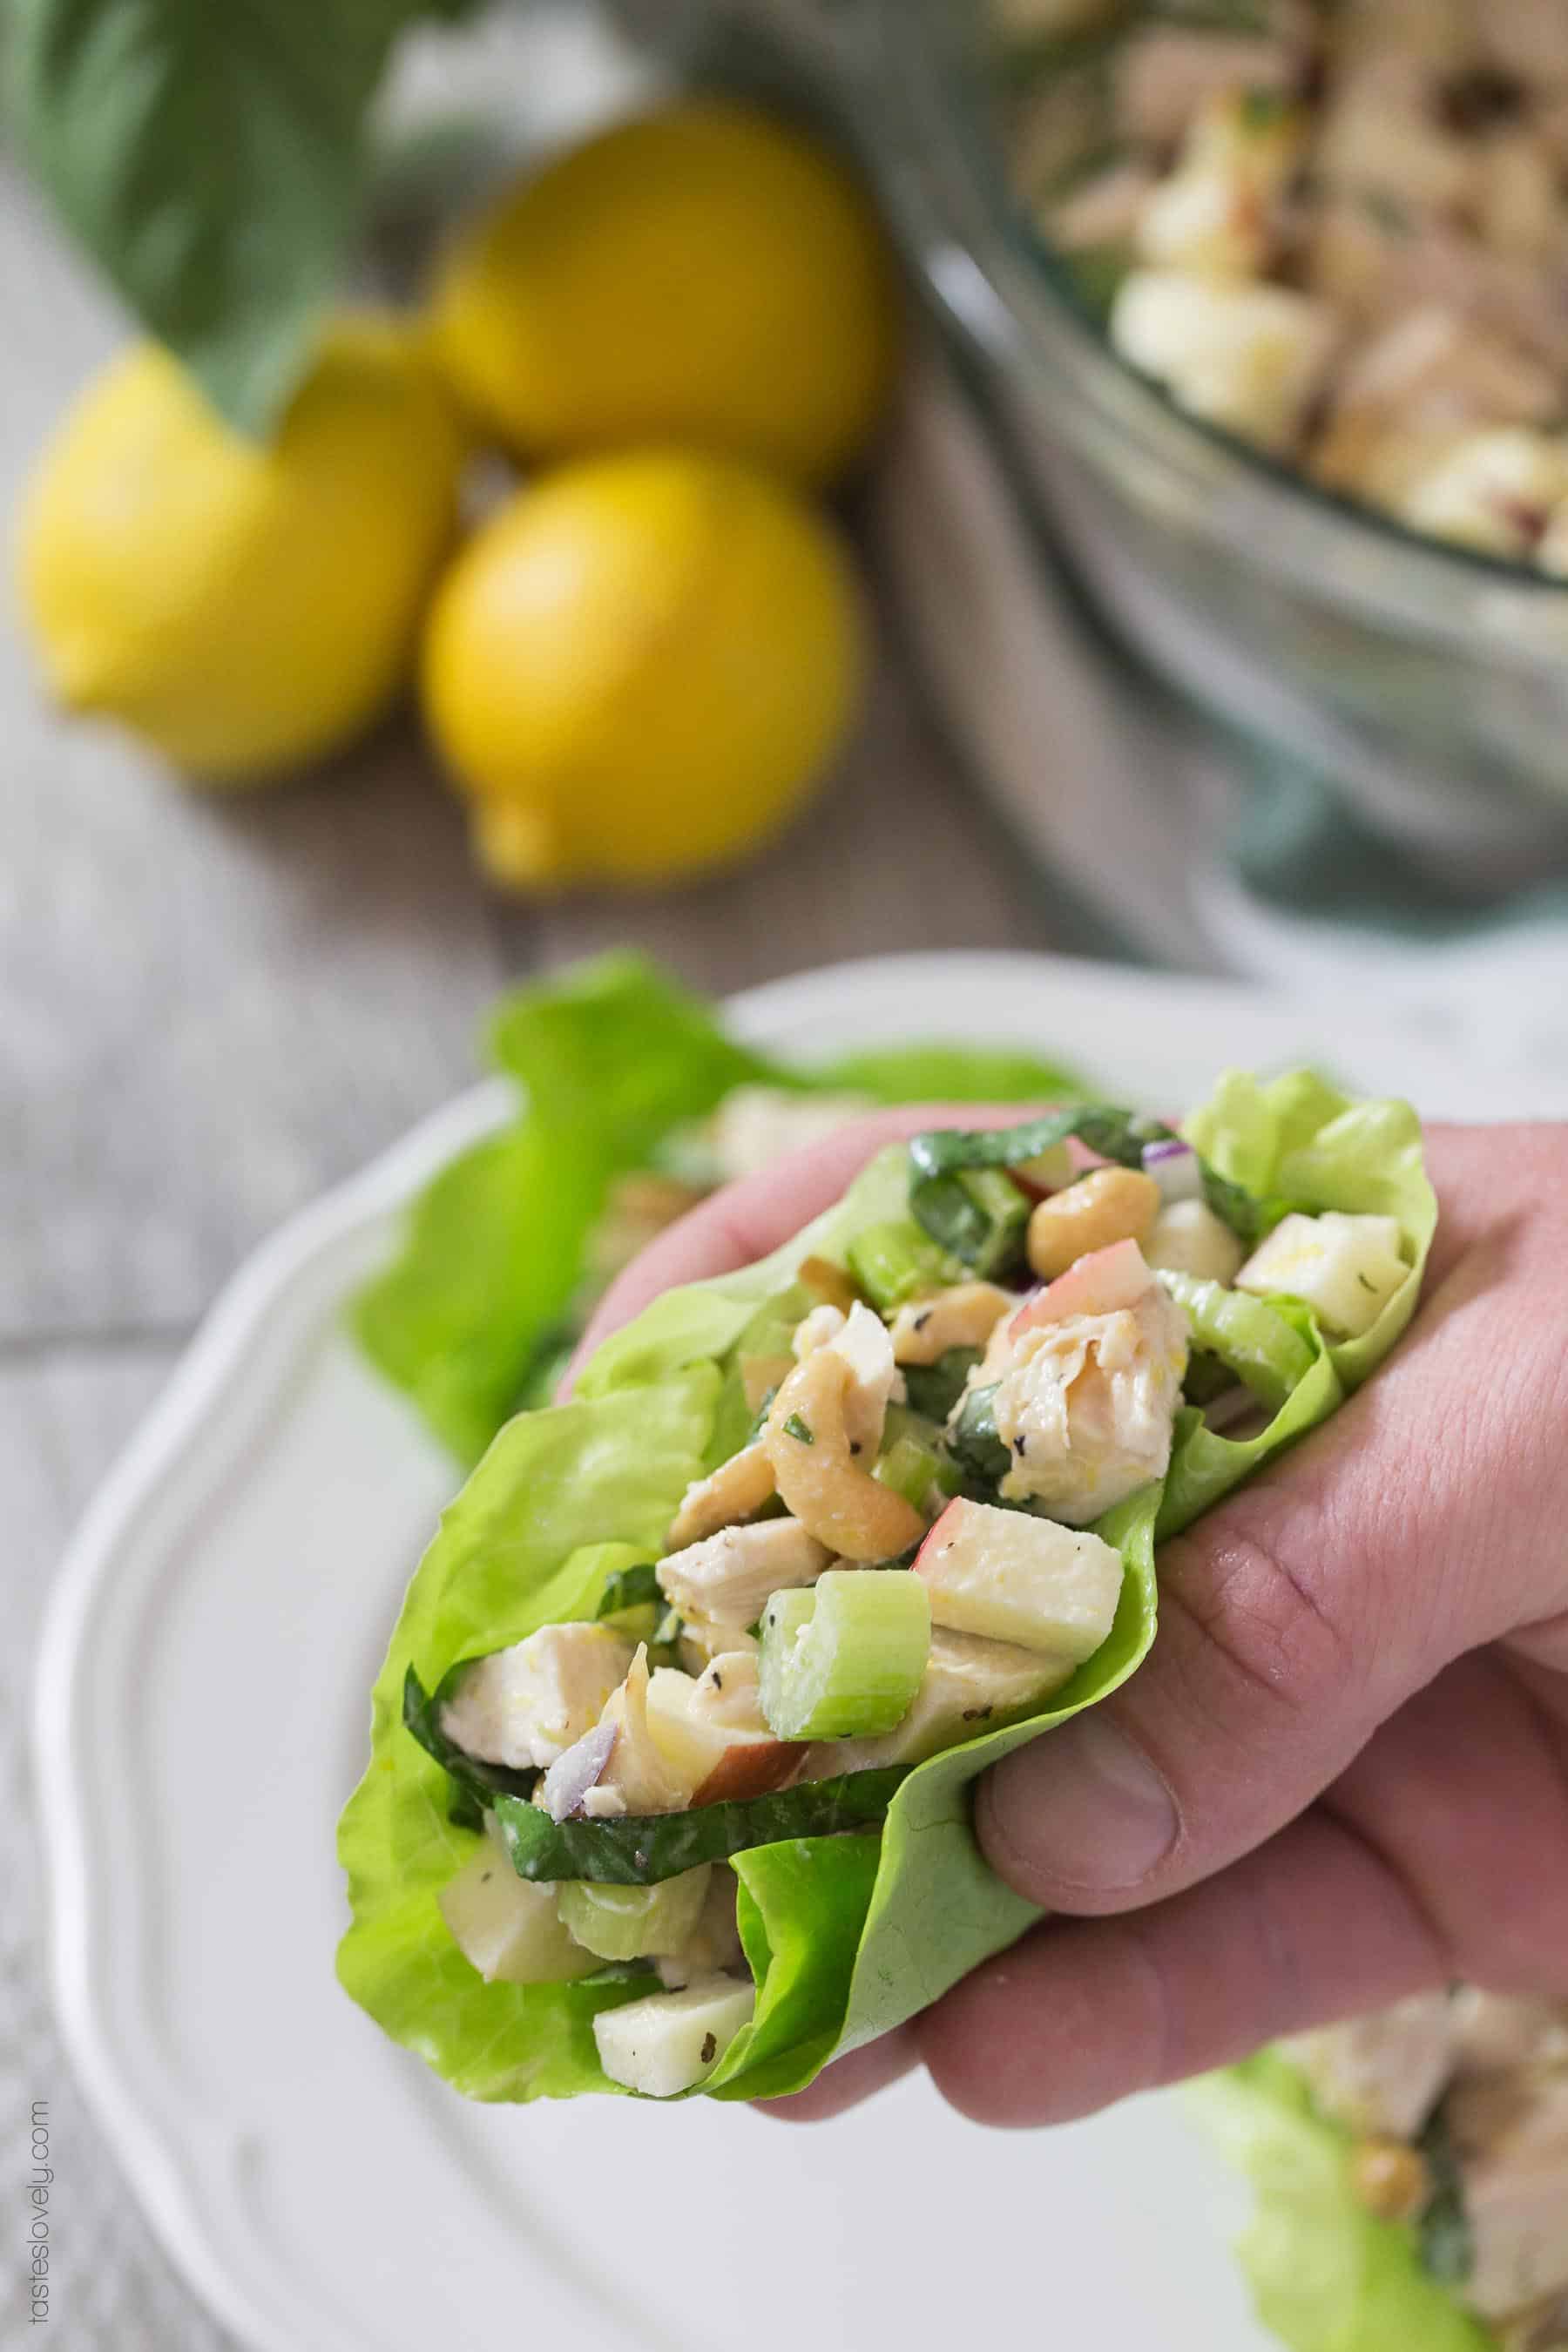 Paleo Lemon Basil Chicken Salad Lettuce Wraps - a light and healthy lunch recipe that is gluten free, whole30, paleo and dairy free!